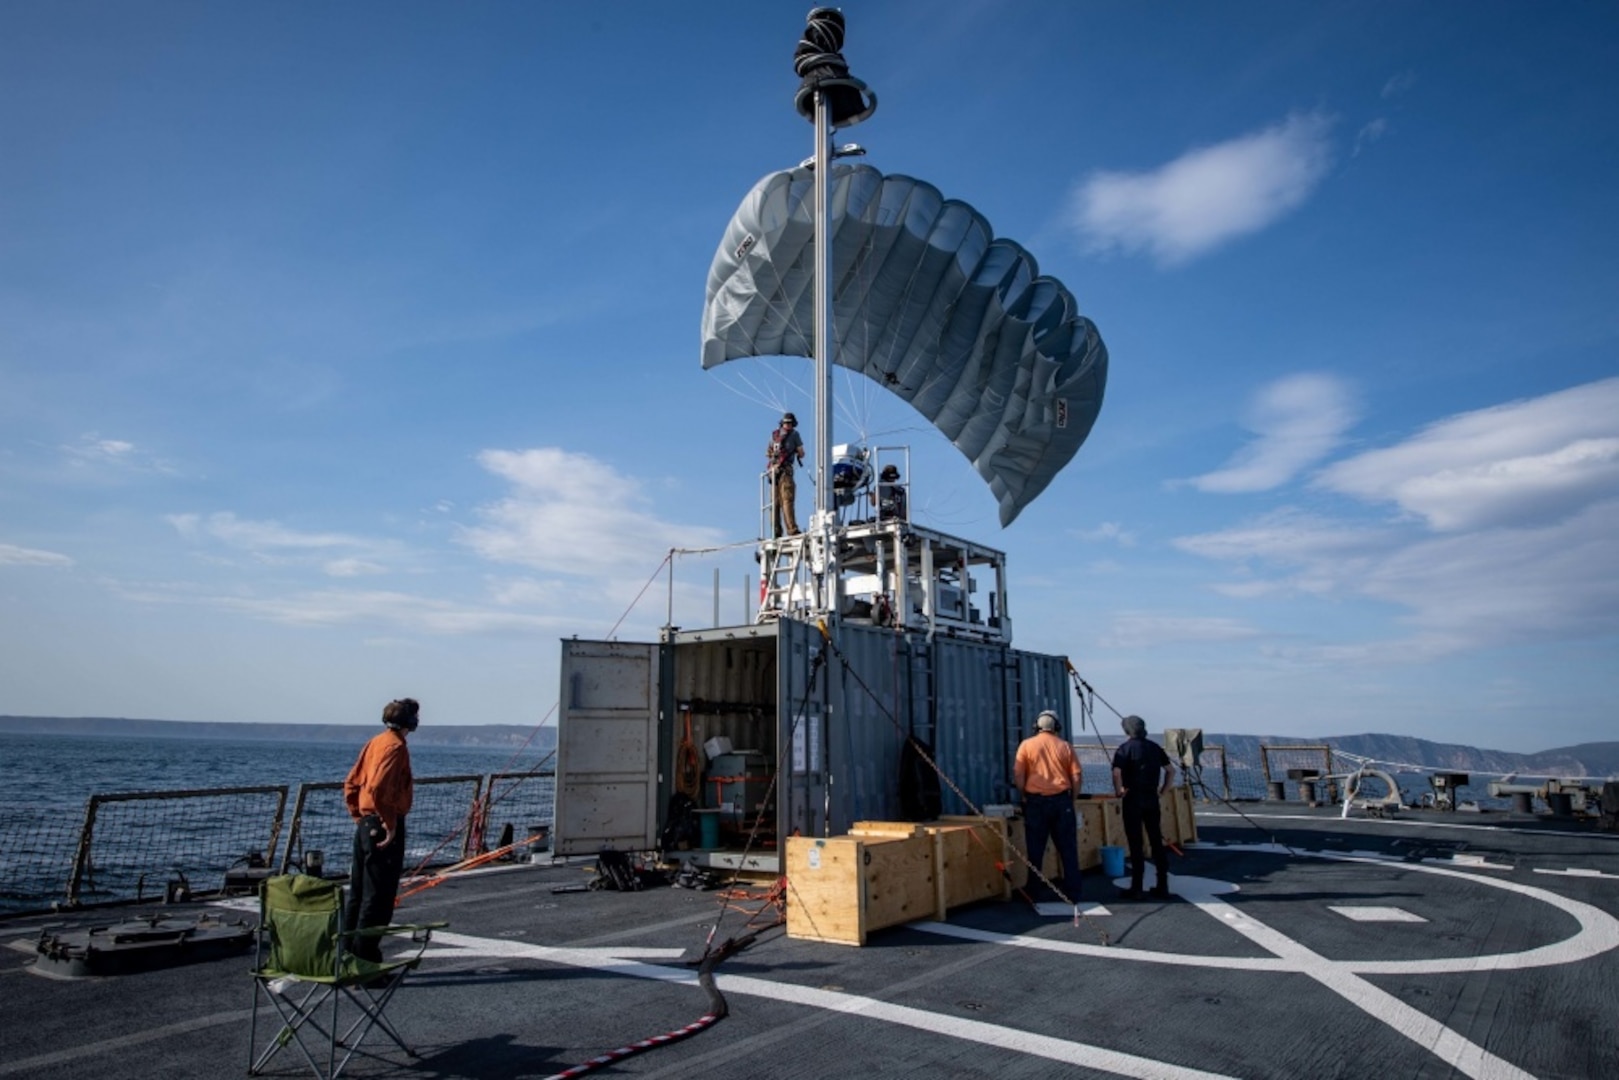 The Arleigh Burke-class guided-missile destroyer USS Porter (DDG 78) launches Towed Airborne Lift of Naval Systems (TALONS) during Exercise Recognised Environmental Picture by Maritime Unmanned Systems REP (MUS) 2019 in the Atlantic Ocean Sept. 13, 2019. REP (MUS) 2019 is a multinational unmanned underwater vehicle exercise hosted by the Portuguese Navy and is aimed at enhancing working relationships with NATO and participating international partners. This is the U.S.'s first participation in the REP (MUS) exercise series. (U.S. Navy photo by Mass Communication Specialist 3rd Class T. Logan Keown/Released)